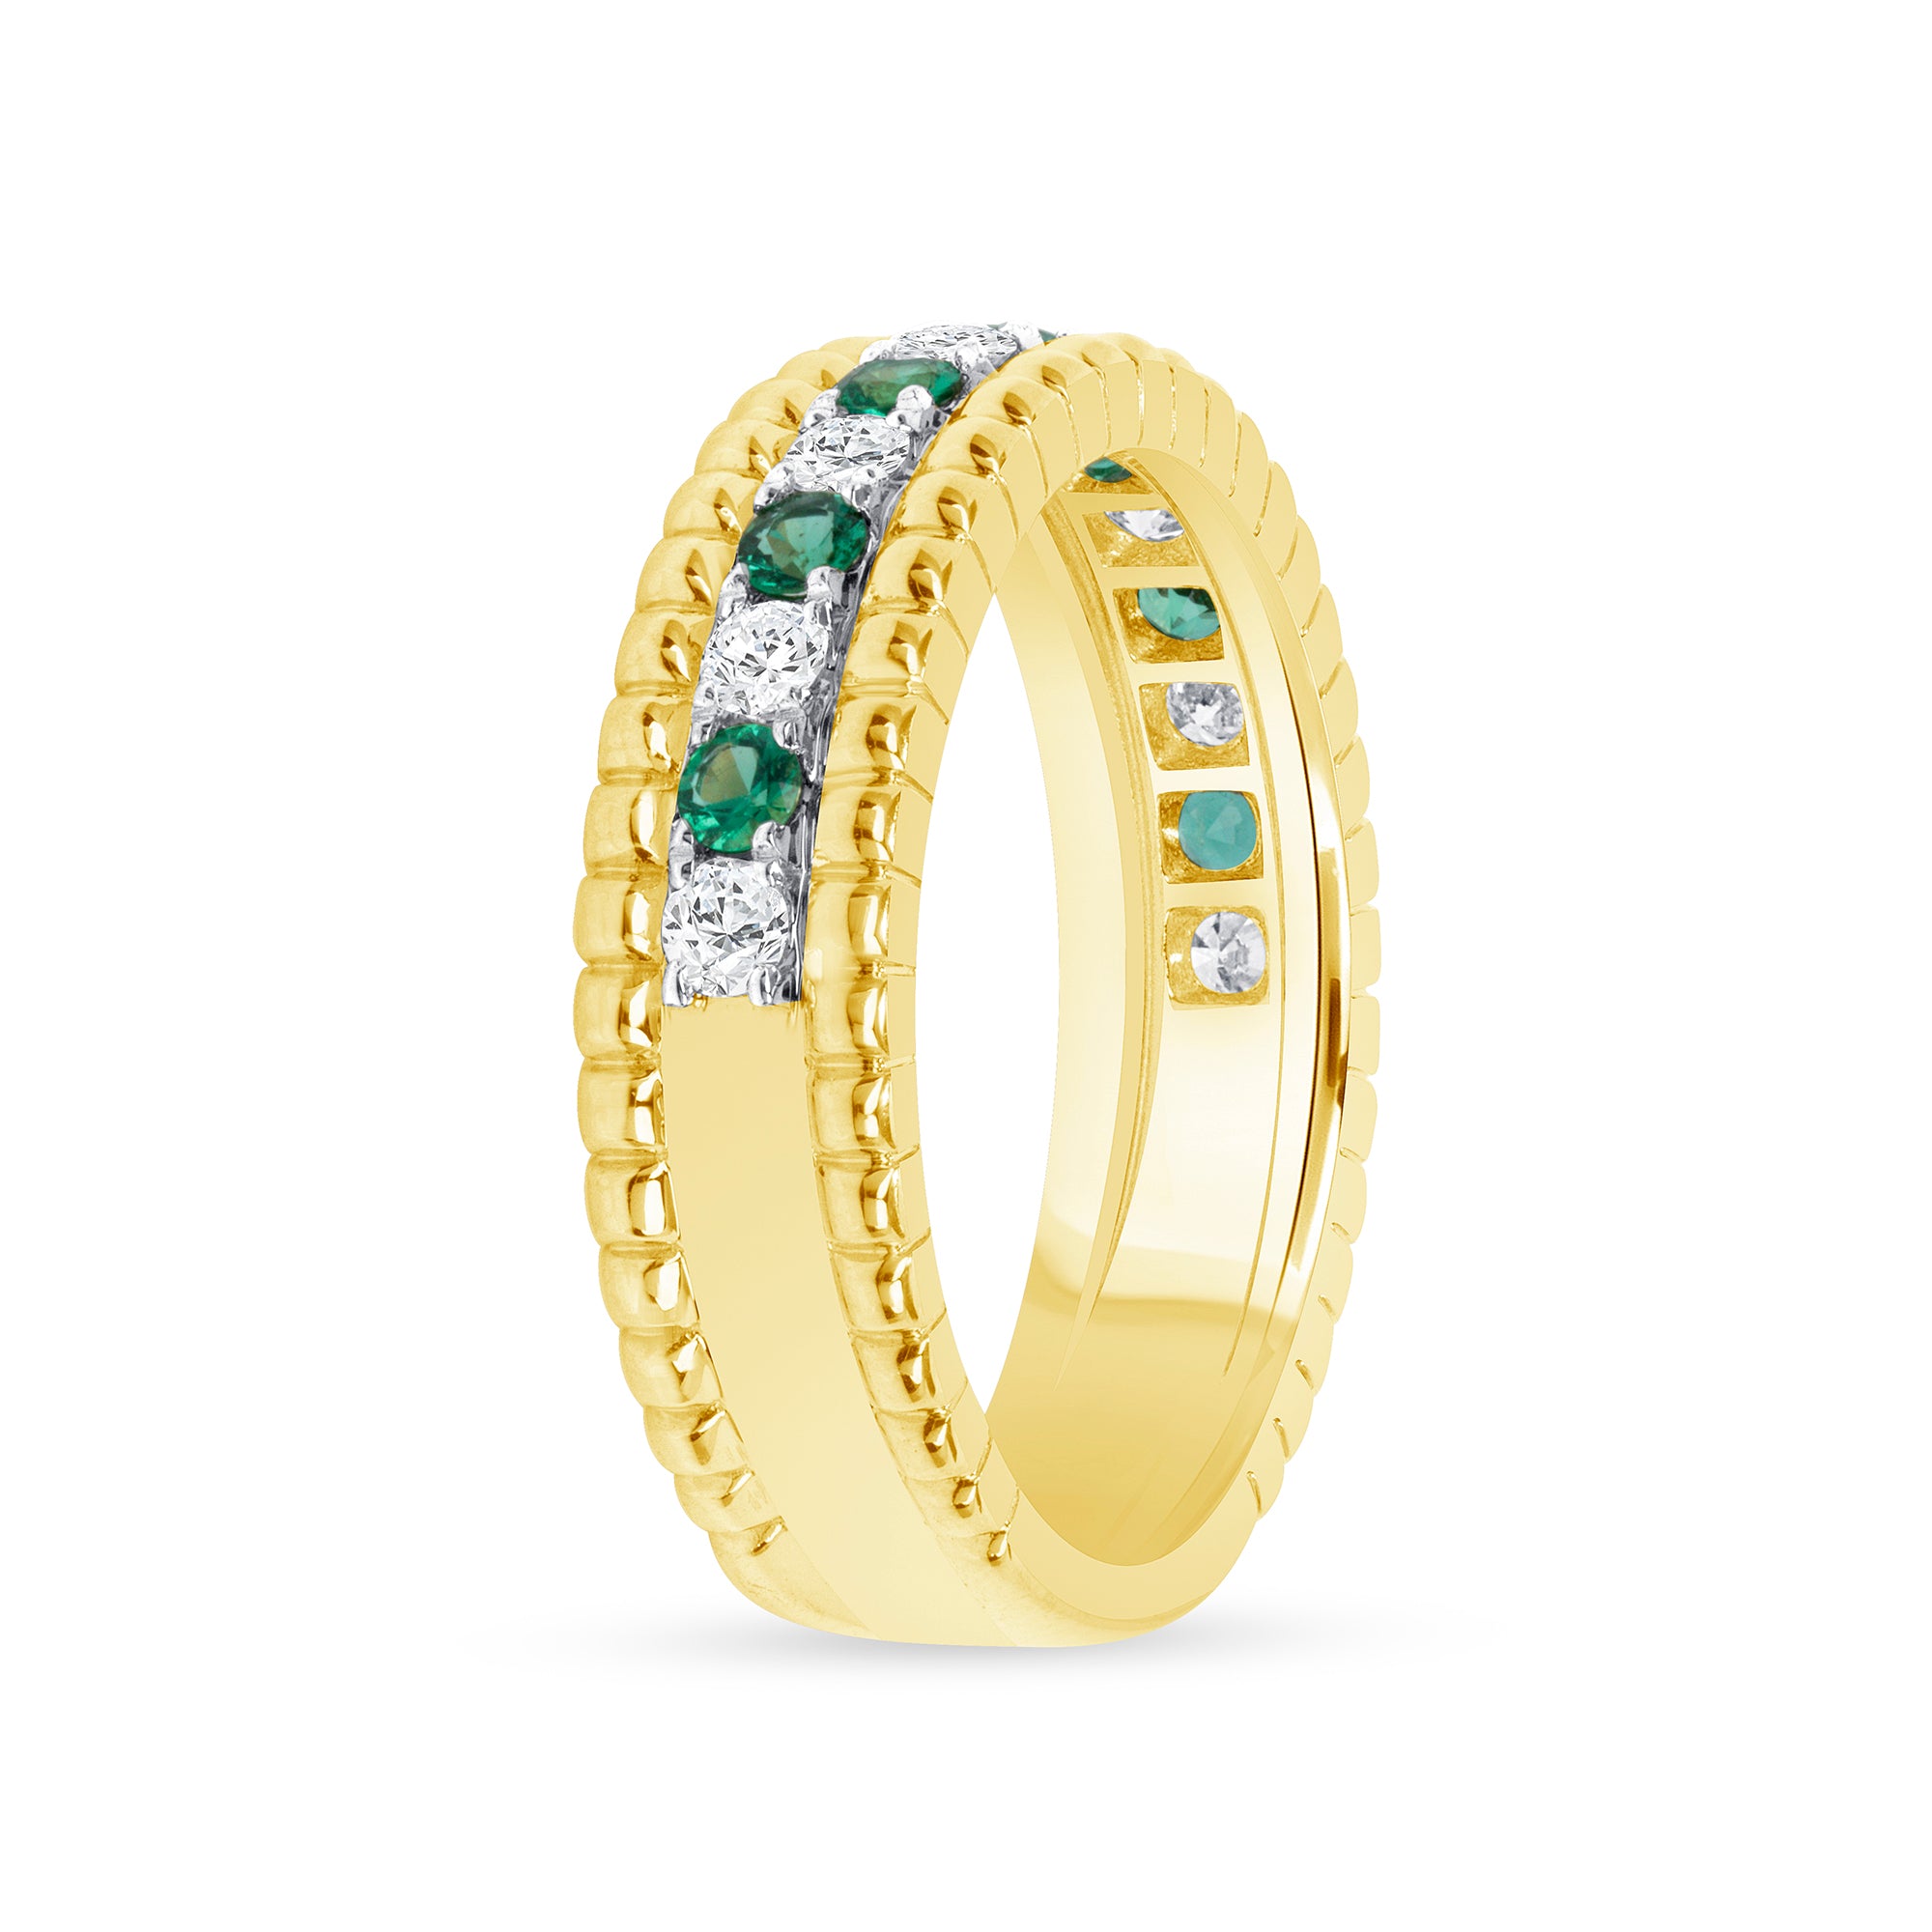 Alternating Round Brilliant Diamond and Emerald Band in 18K Yellow Gold